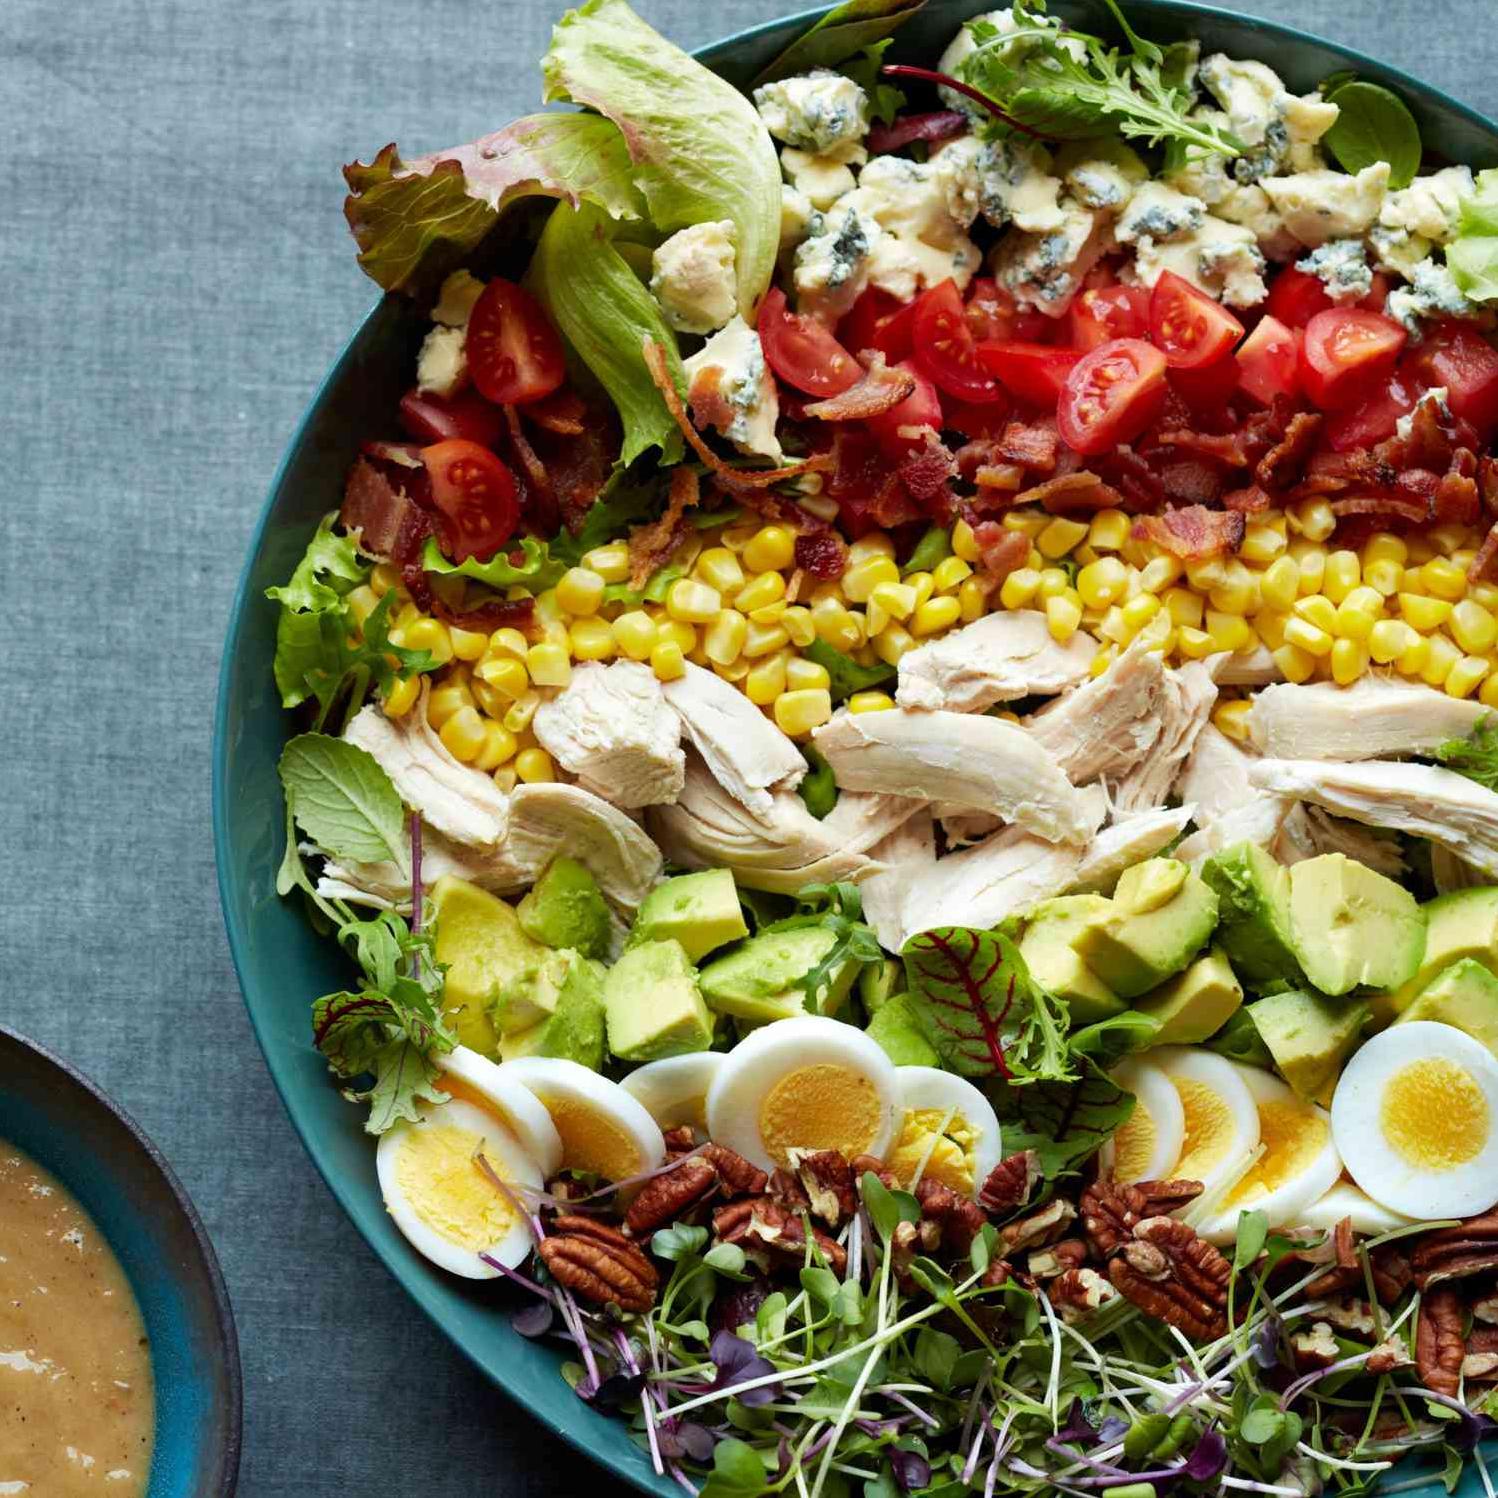  A colorful and crunchy salad never looked so good.